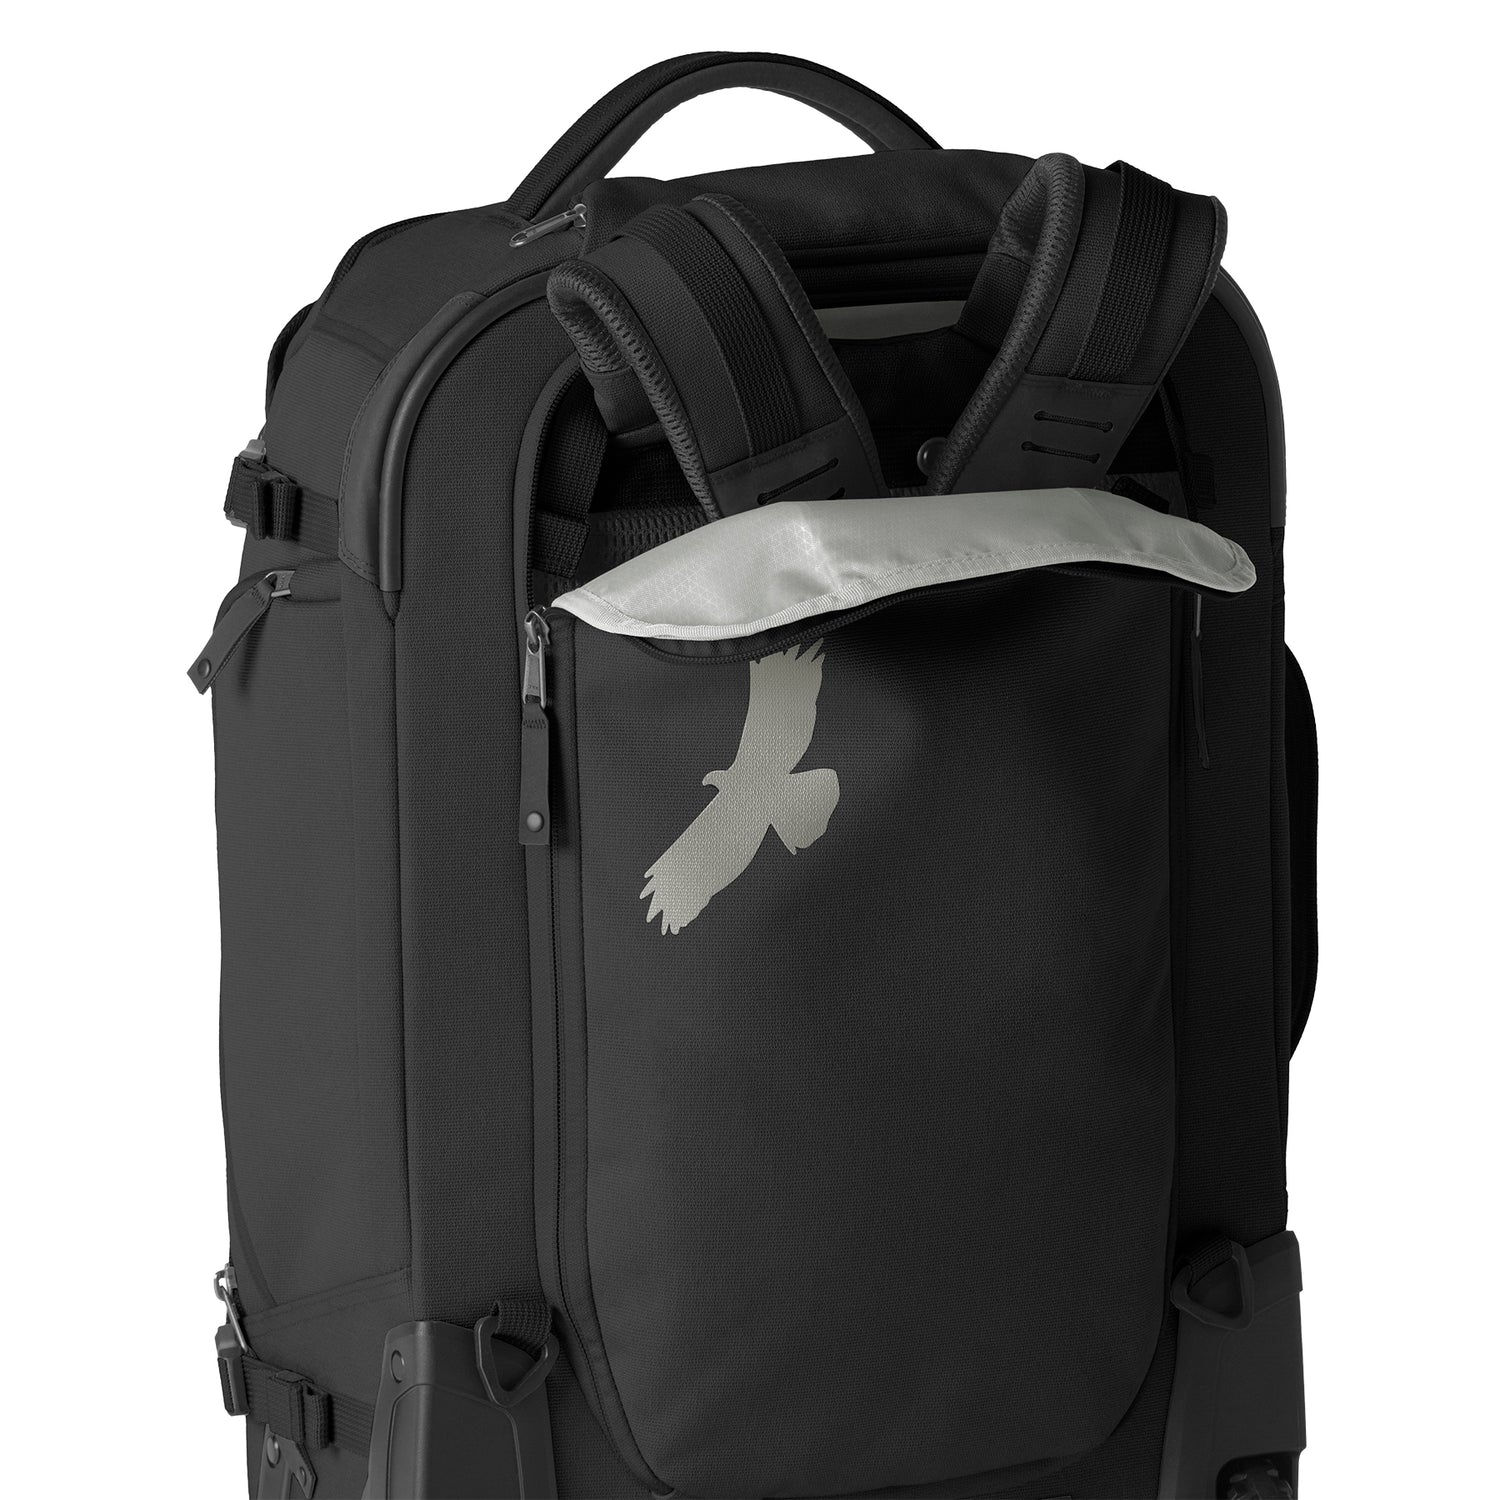 Carry-On Backpack, Travel Backpack